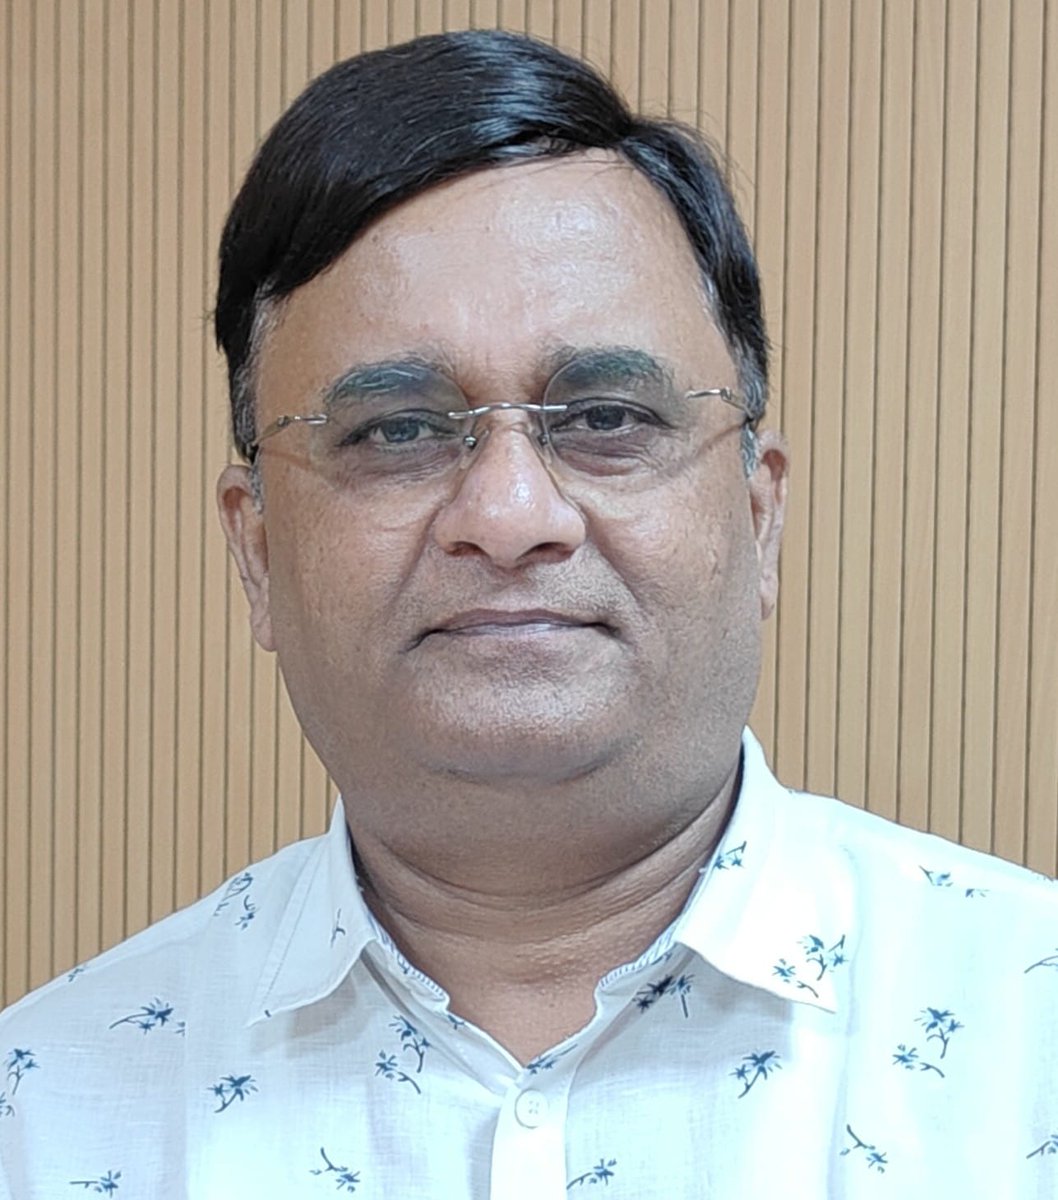 #MakingBHUProud 
Congratulations to Prof. Sunit Kumar Singh, Molecular Biology Unit, #IMS, on being conferred the 'Prof.Sohail Ahmad Award 2022' of Indian Academy of #Biomedical Sciences. The award is being presented to him for his contribution in #BiomedicalSciences.@VCofficeBHU